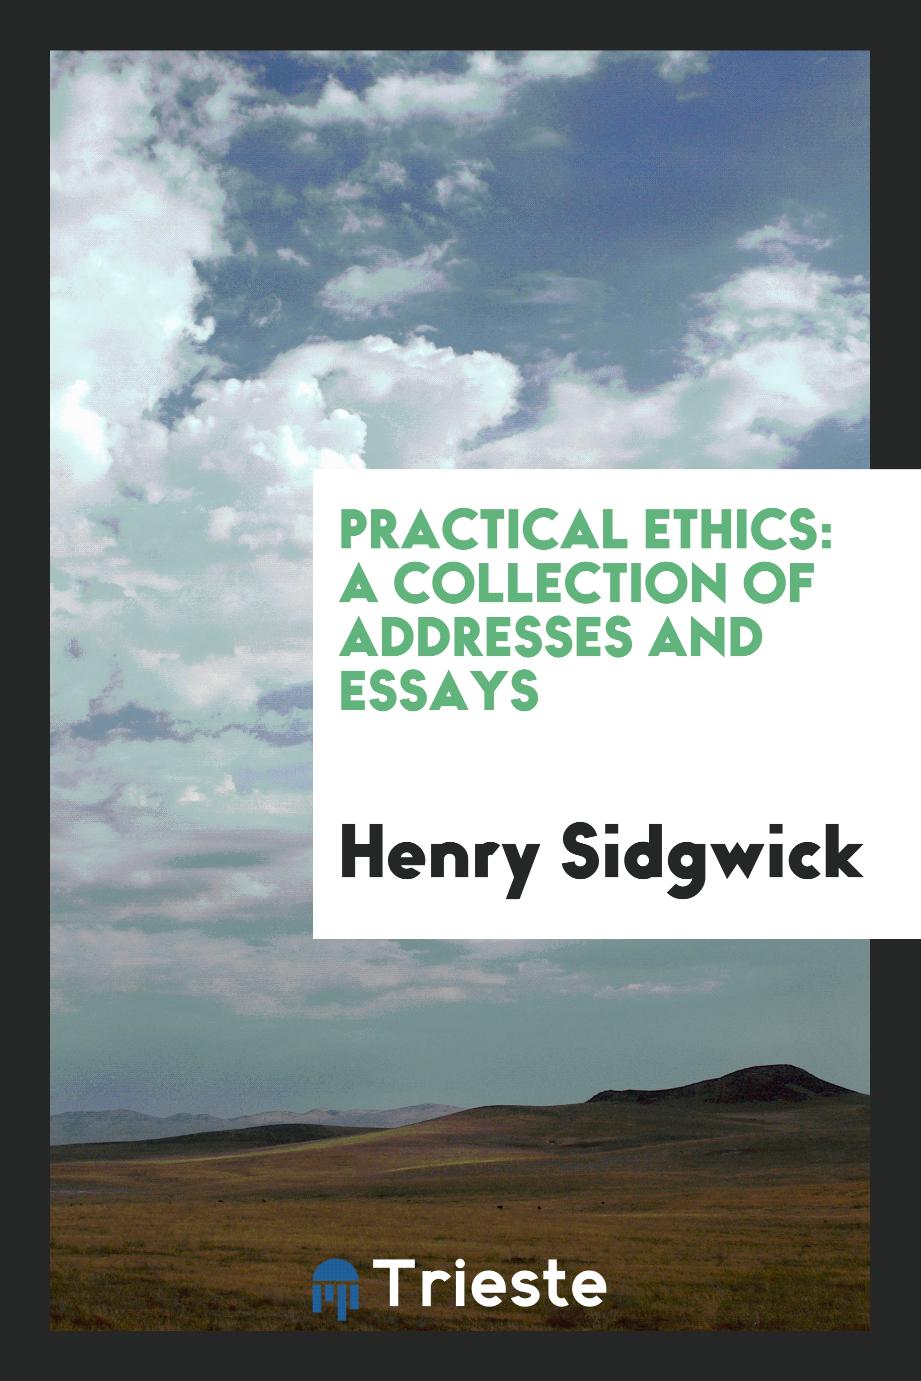 Practical ethics: a collection of addresses and essays